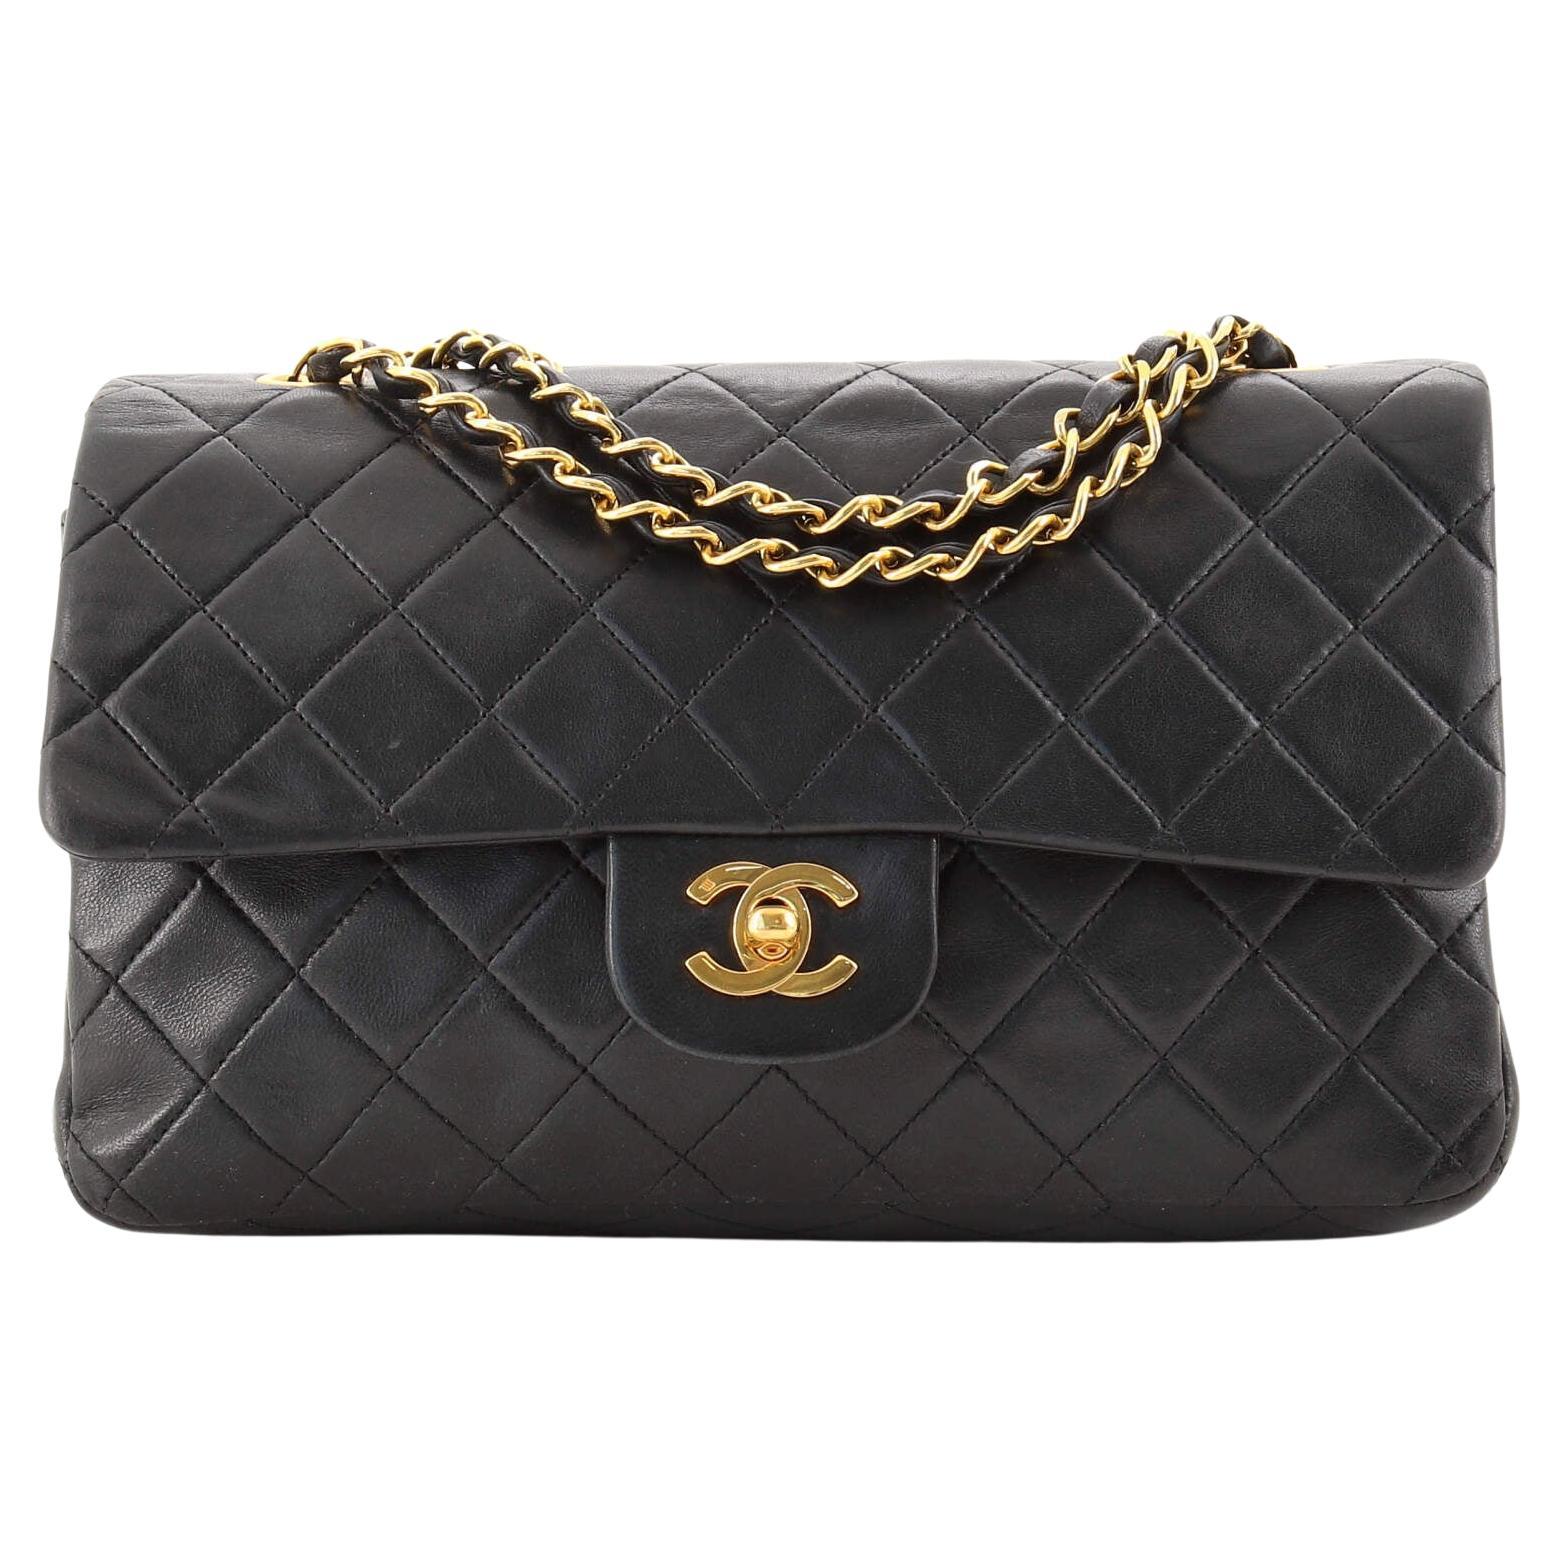 Chanel Vintage Classic Double Flap Bag Quilted Lambskin Medium